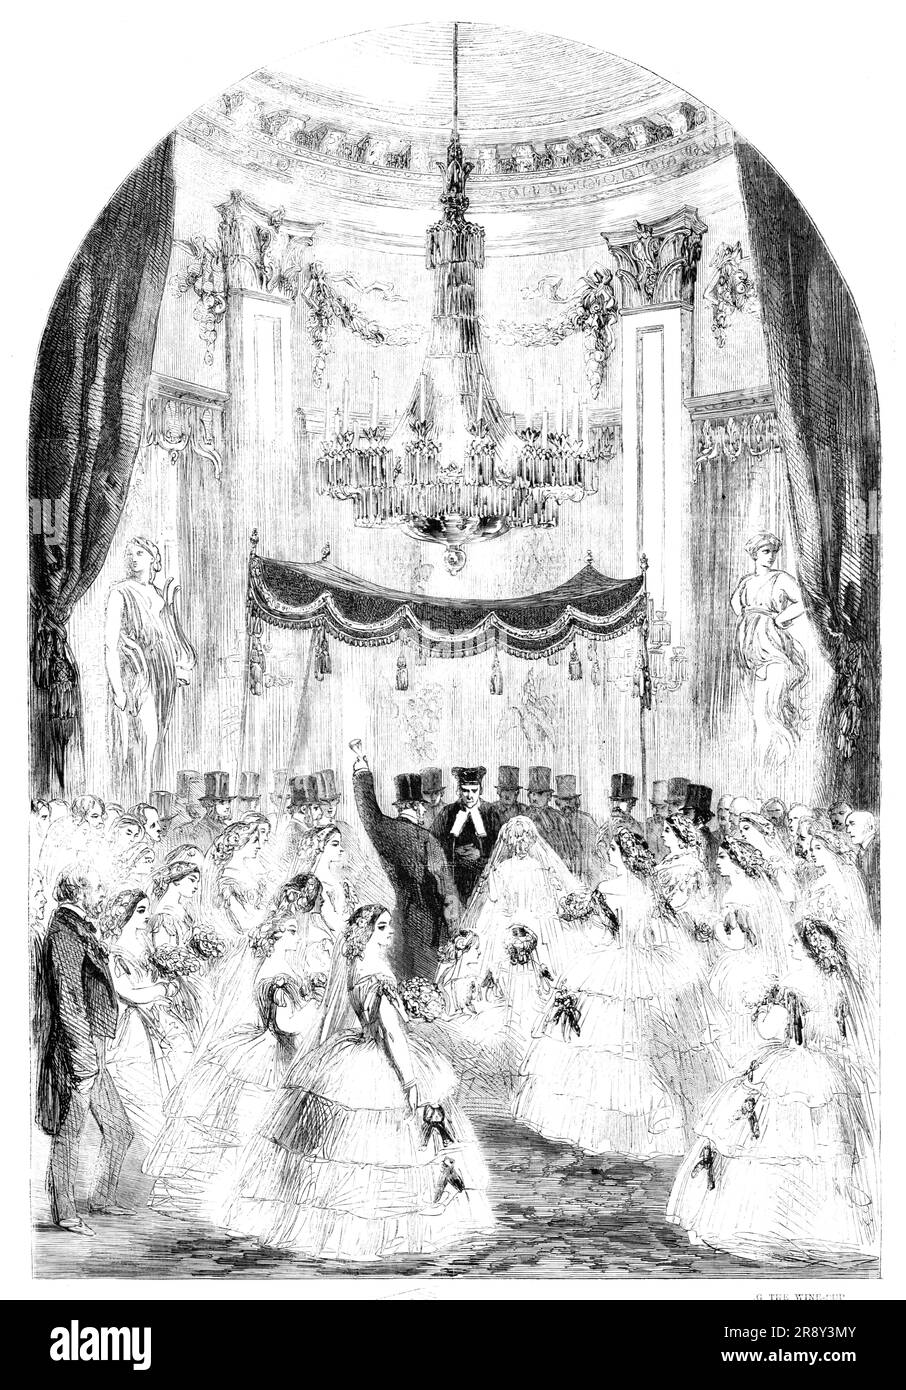 Marriage Ceremonial of the Baron Alphonse de Rothschild and Miss Leonora Rothschild [at Gunnersbury Park]: the Bridegroom Breaking the Wine-cup, 1857. 'The marriage contract having been read, the Chief Rabbi presented a wine-cup, and invoked on the wedding pair seven blessings. The Chief Rabbi then congratulated the pair, and offered up a supplication for the poor of the Land of Promise. The wine-cup, which the Hebrews regard as the symbol of blended joy and sorrow, was then taken by the bridegroom, who, after tasting the contents, threw the cup on the ground, when it was shattered into pieces Stock Photo